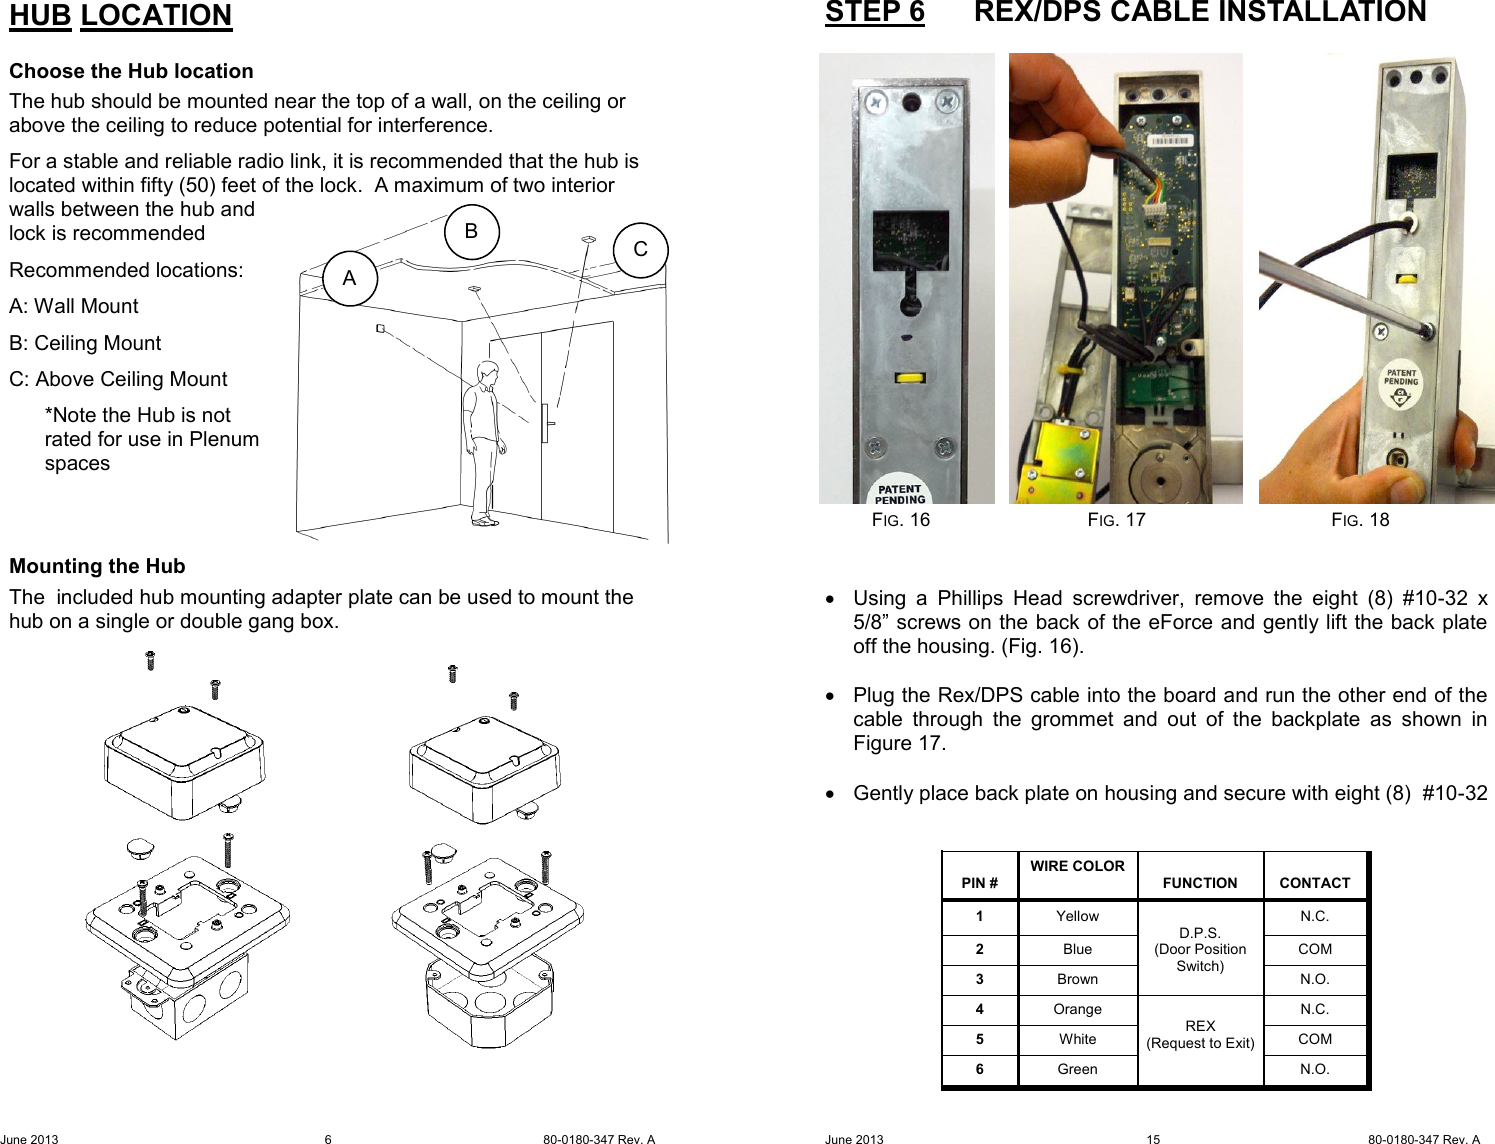 Page 6 of 10 - Adams Rite  A100-3090 Owner's Manual & Installation Instructions A100-3090H 80-0180-347 A